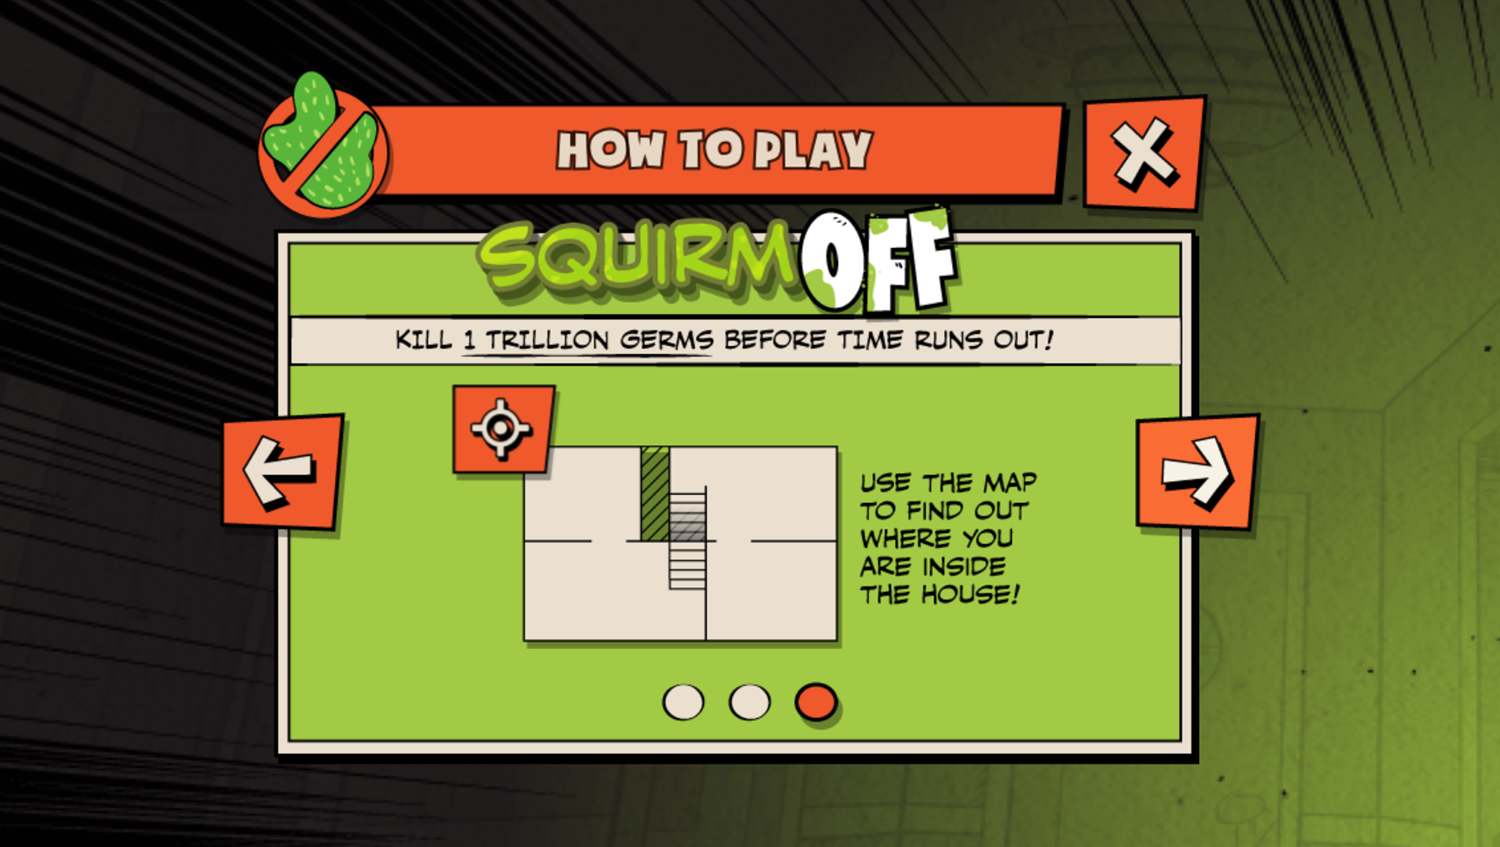 Loud House Germ Squirmish Game Squirm Off Play Tips Screenshot.